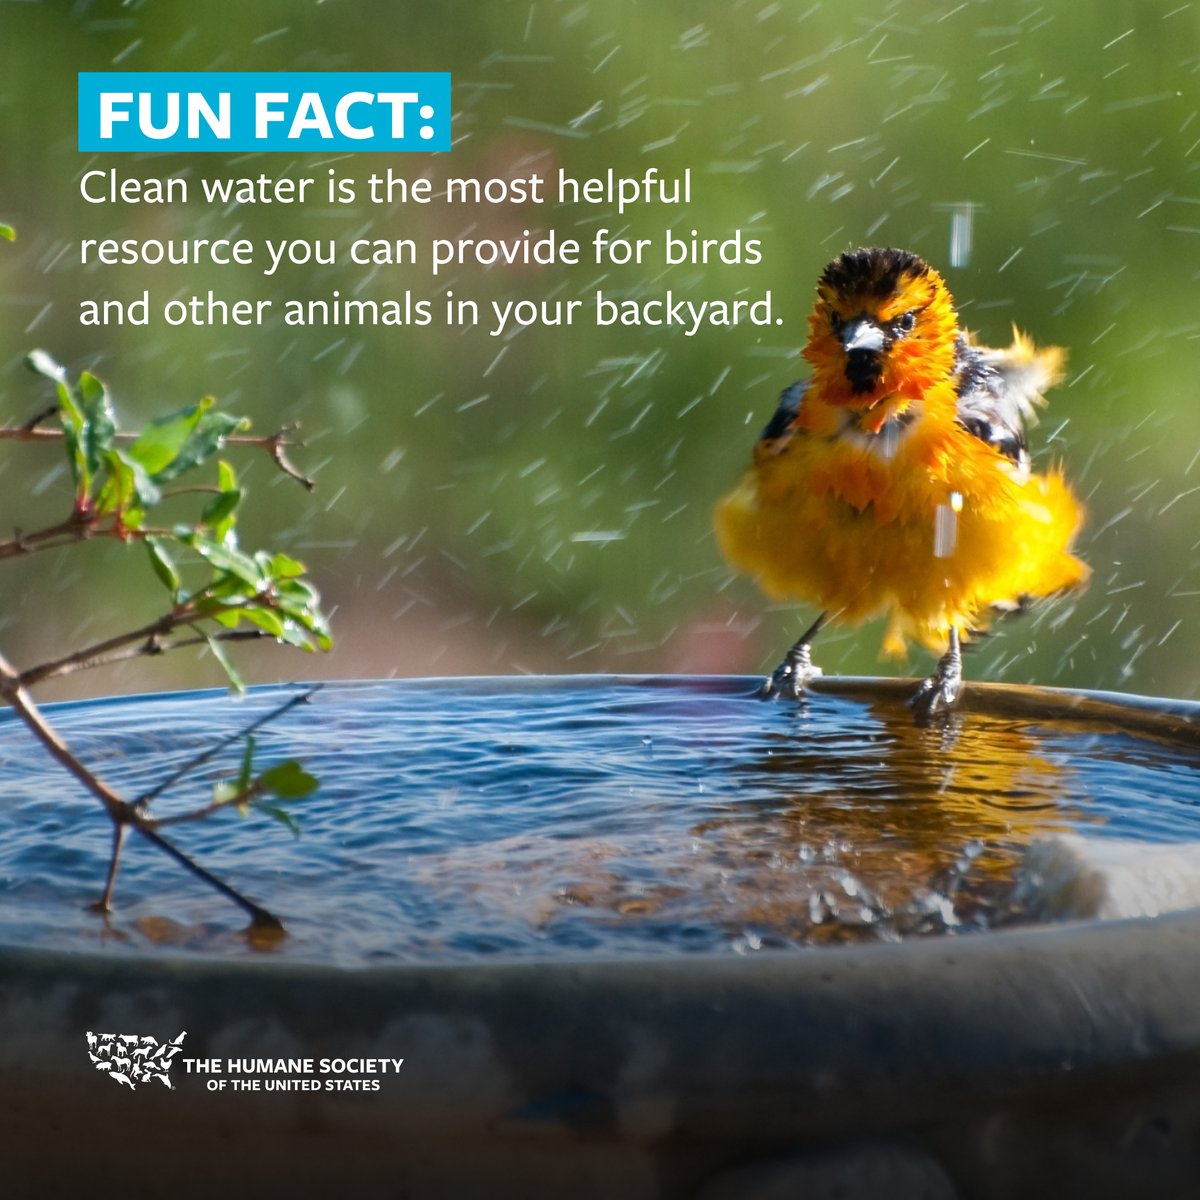 One of the best ways to enjoy wildlife in the comfort of your home is by watching the birds who visit your backyard. 🐦⛲

Find more backyard bird-feeding tips here: hsus.link/x954ky